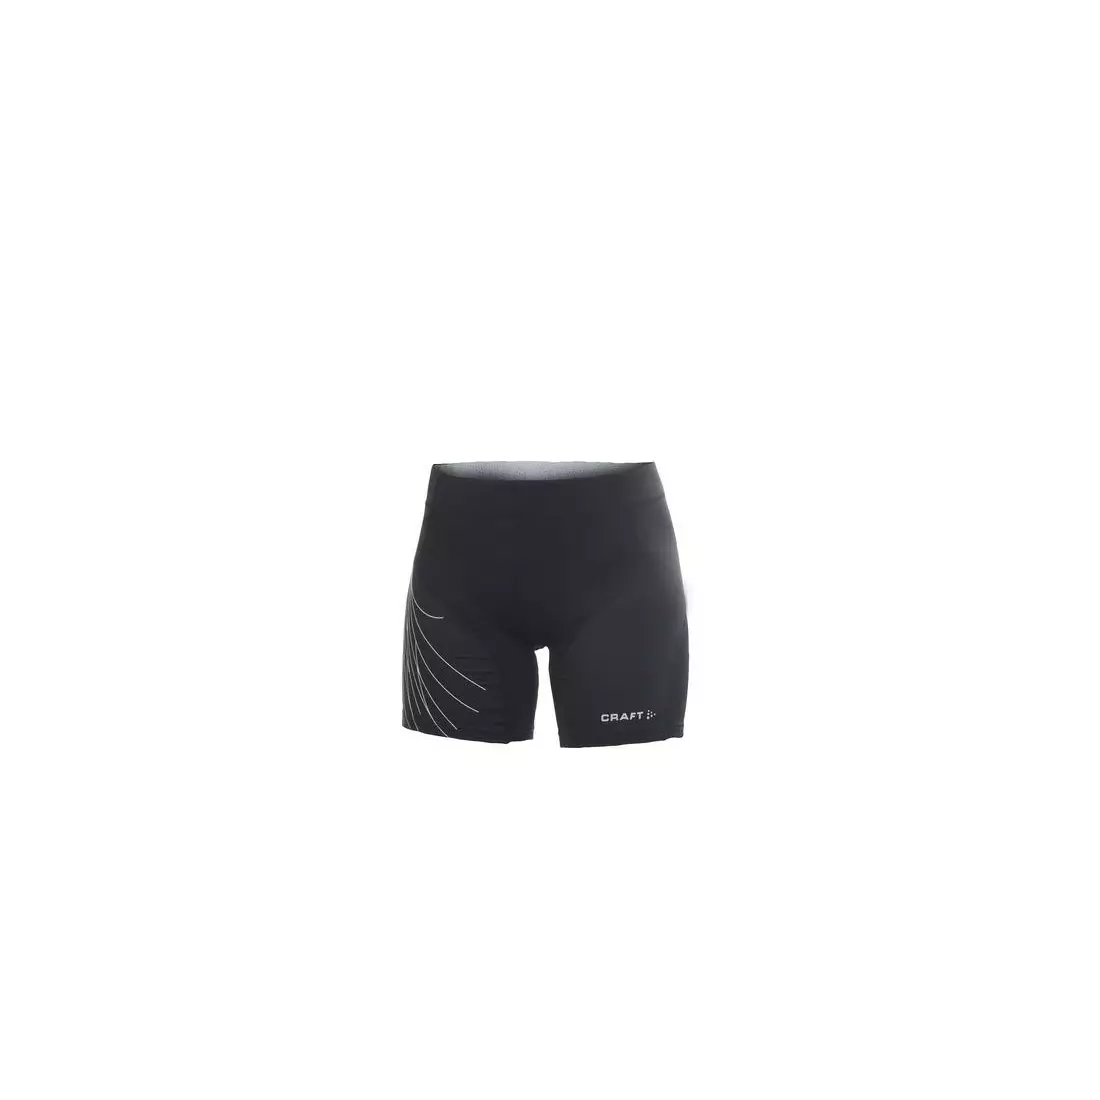 CRAFT PERFORMANCE women's running and fitness shorts 1900635-9999